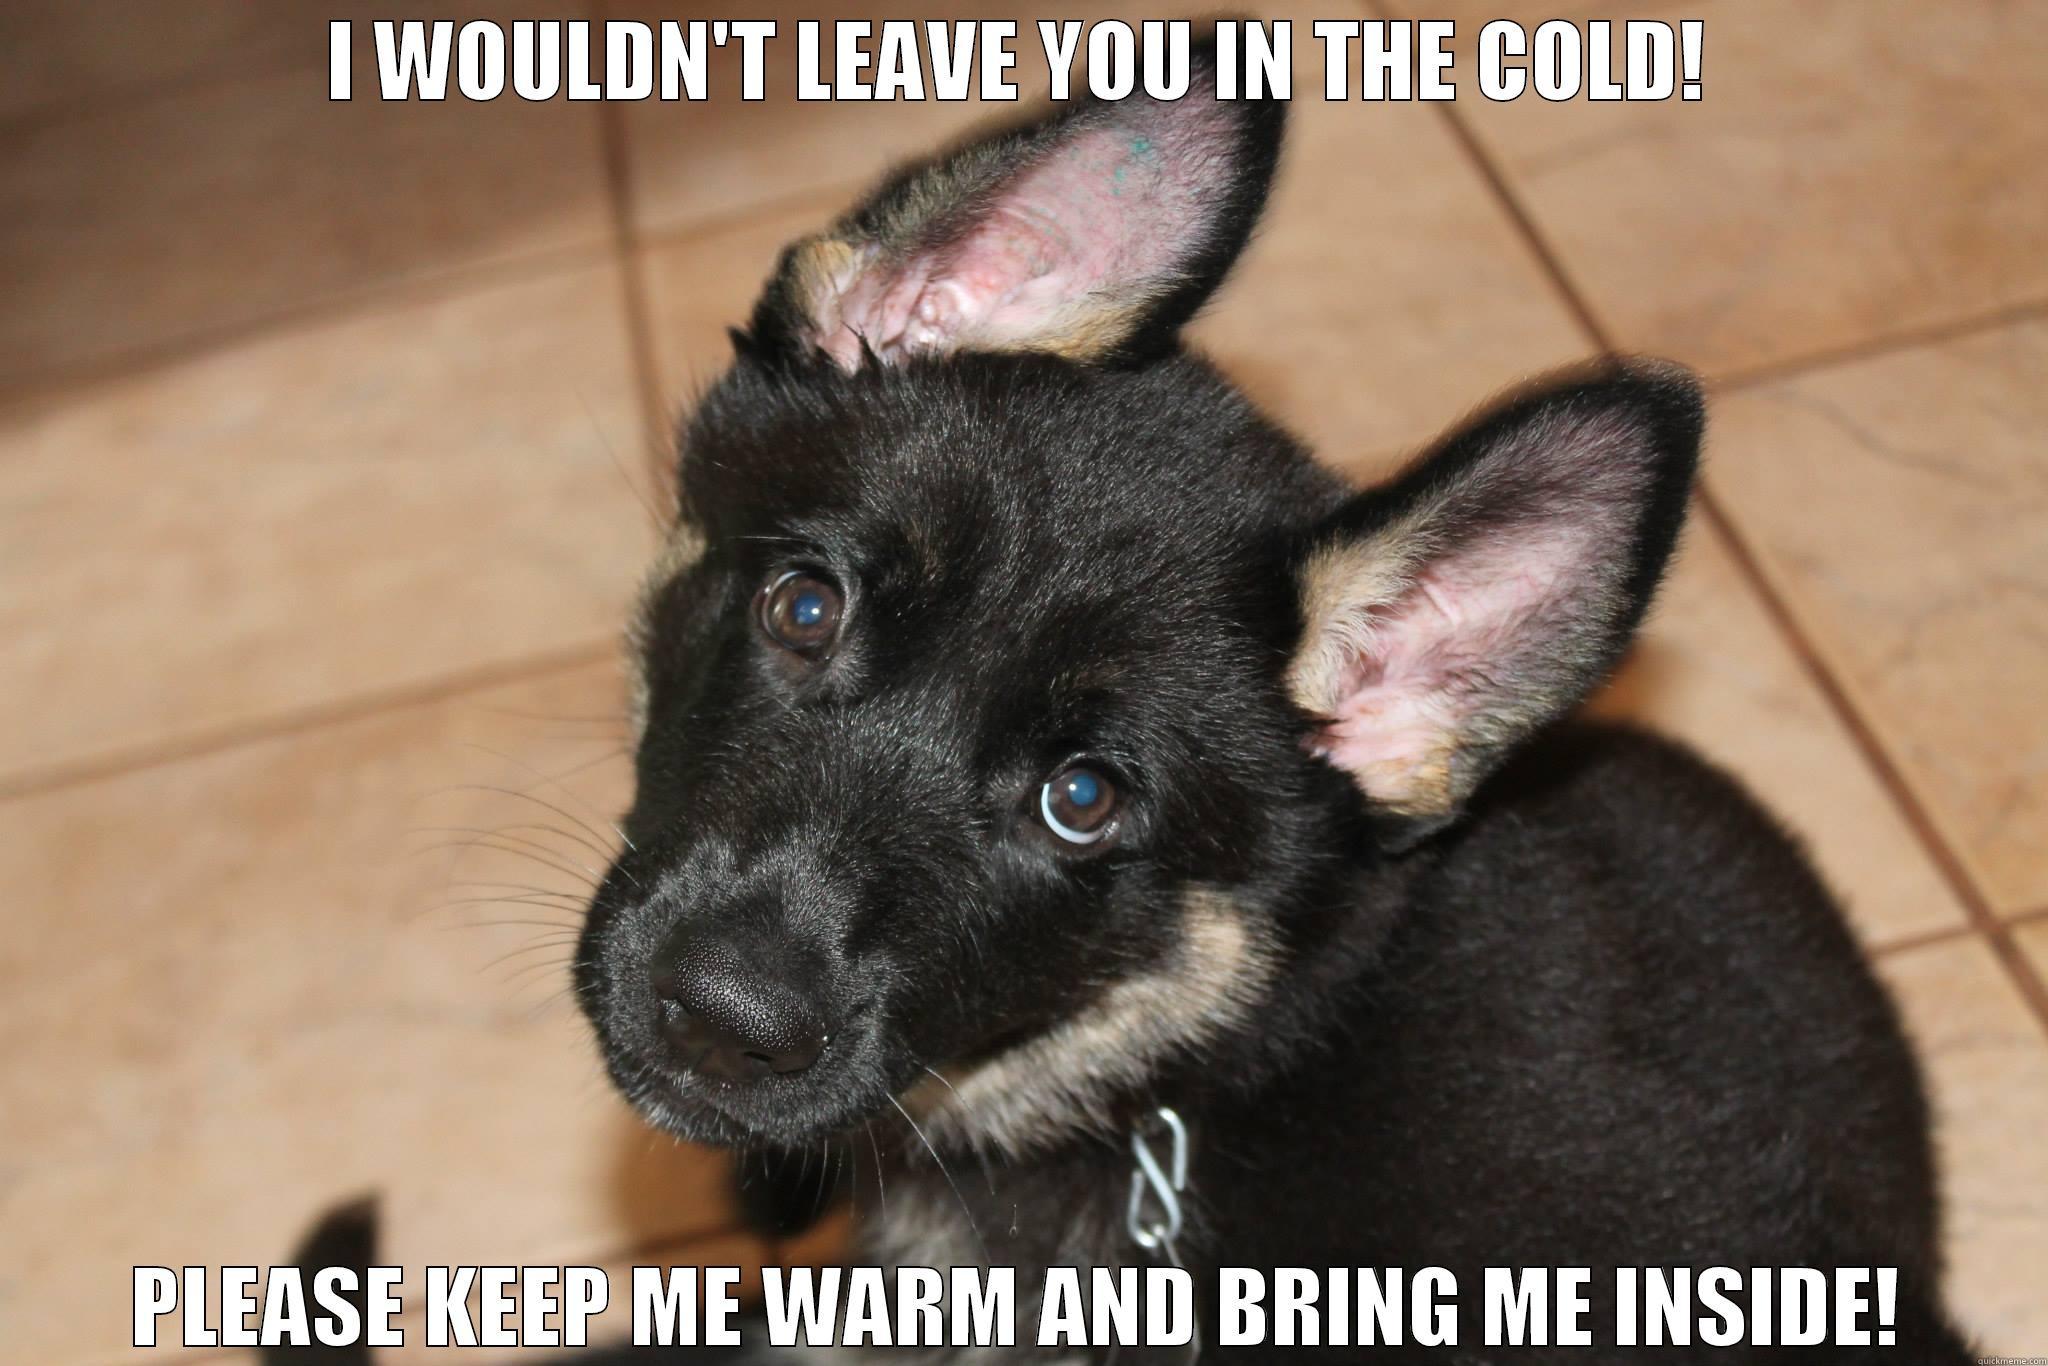 Bring pets in - I WOULDN'T LEAVE YOU IN THE COLD! PLEASE KEEP ME WARM AND BRING ME INSIDE! Misc